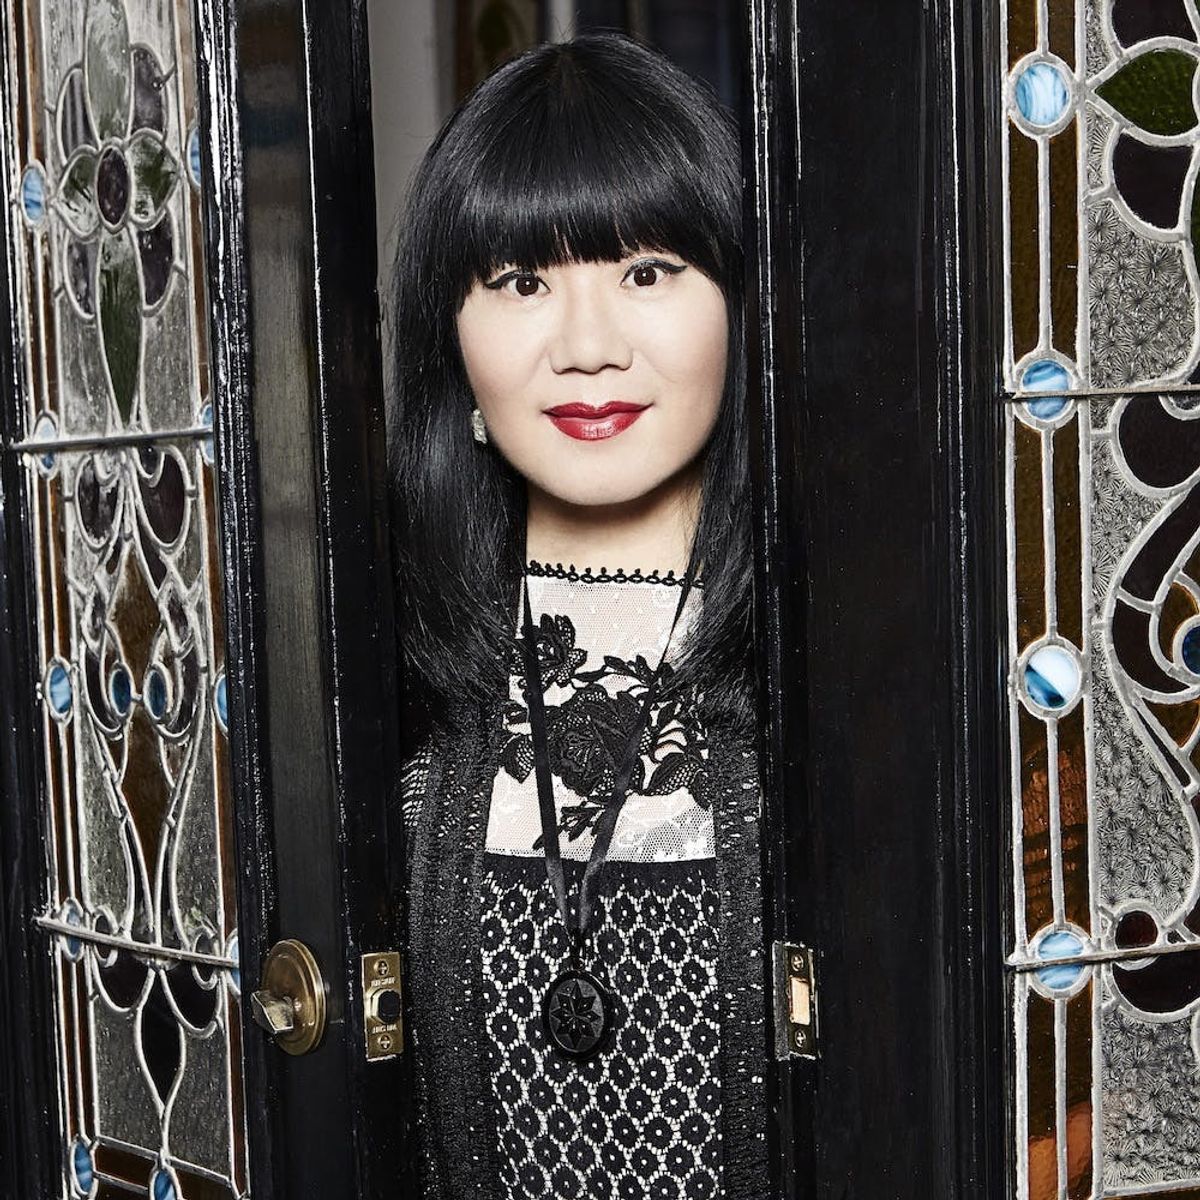 Anna Sui’s Top 3 Makeup Trend Predictions for 2017